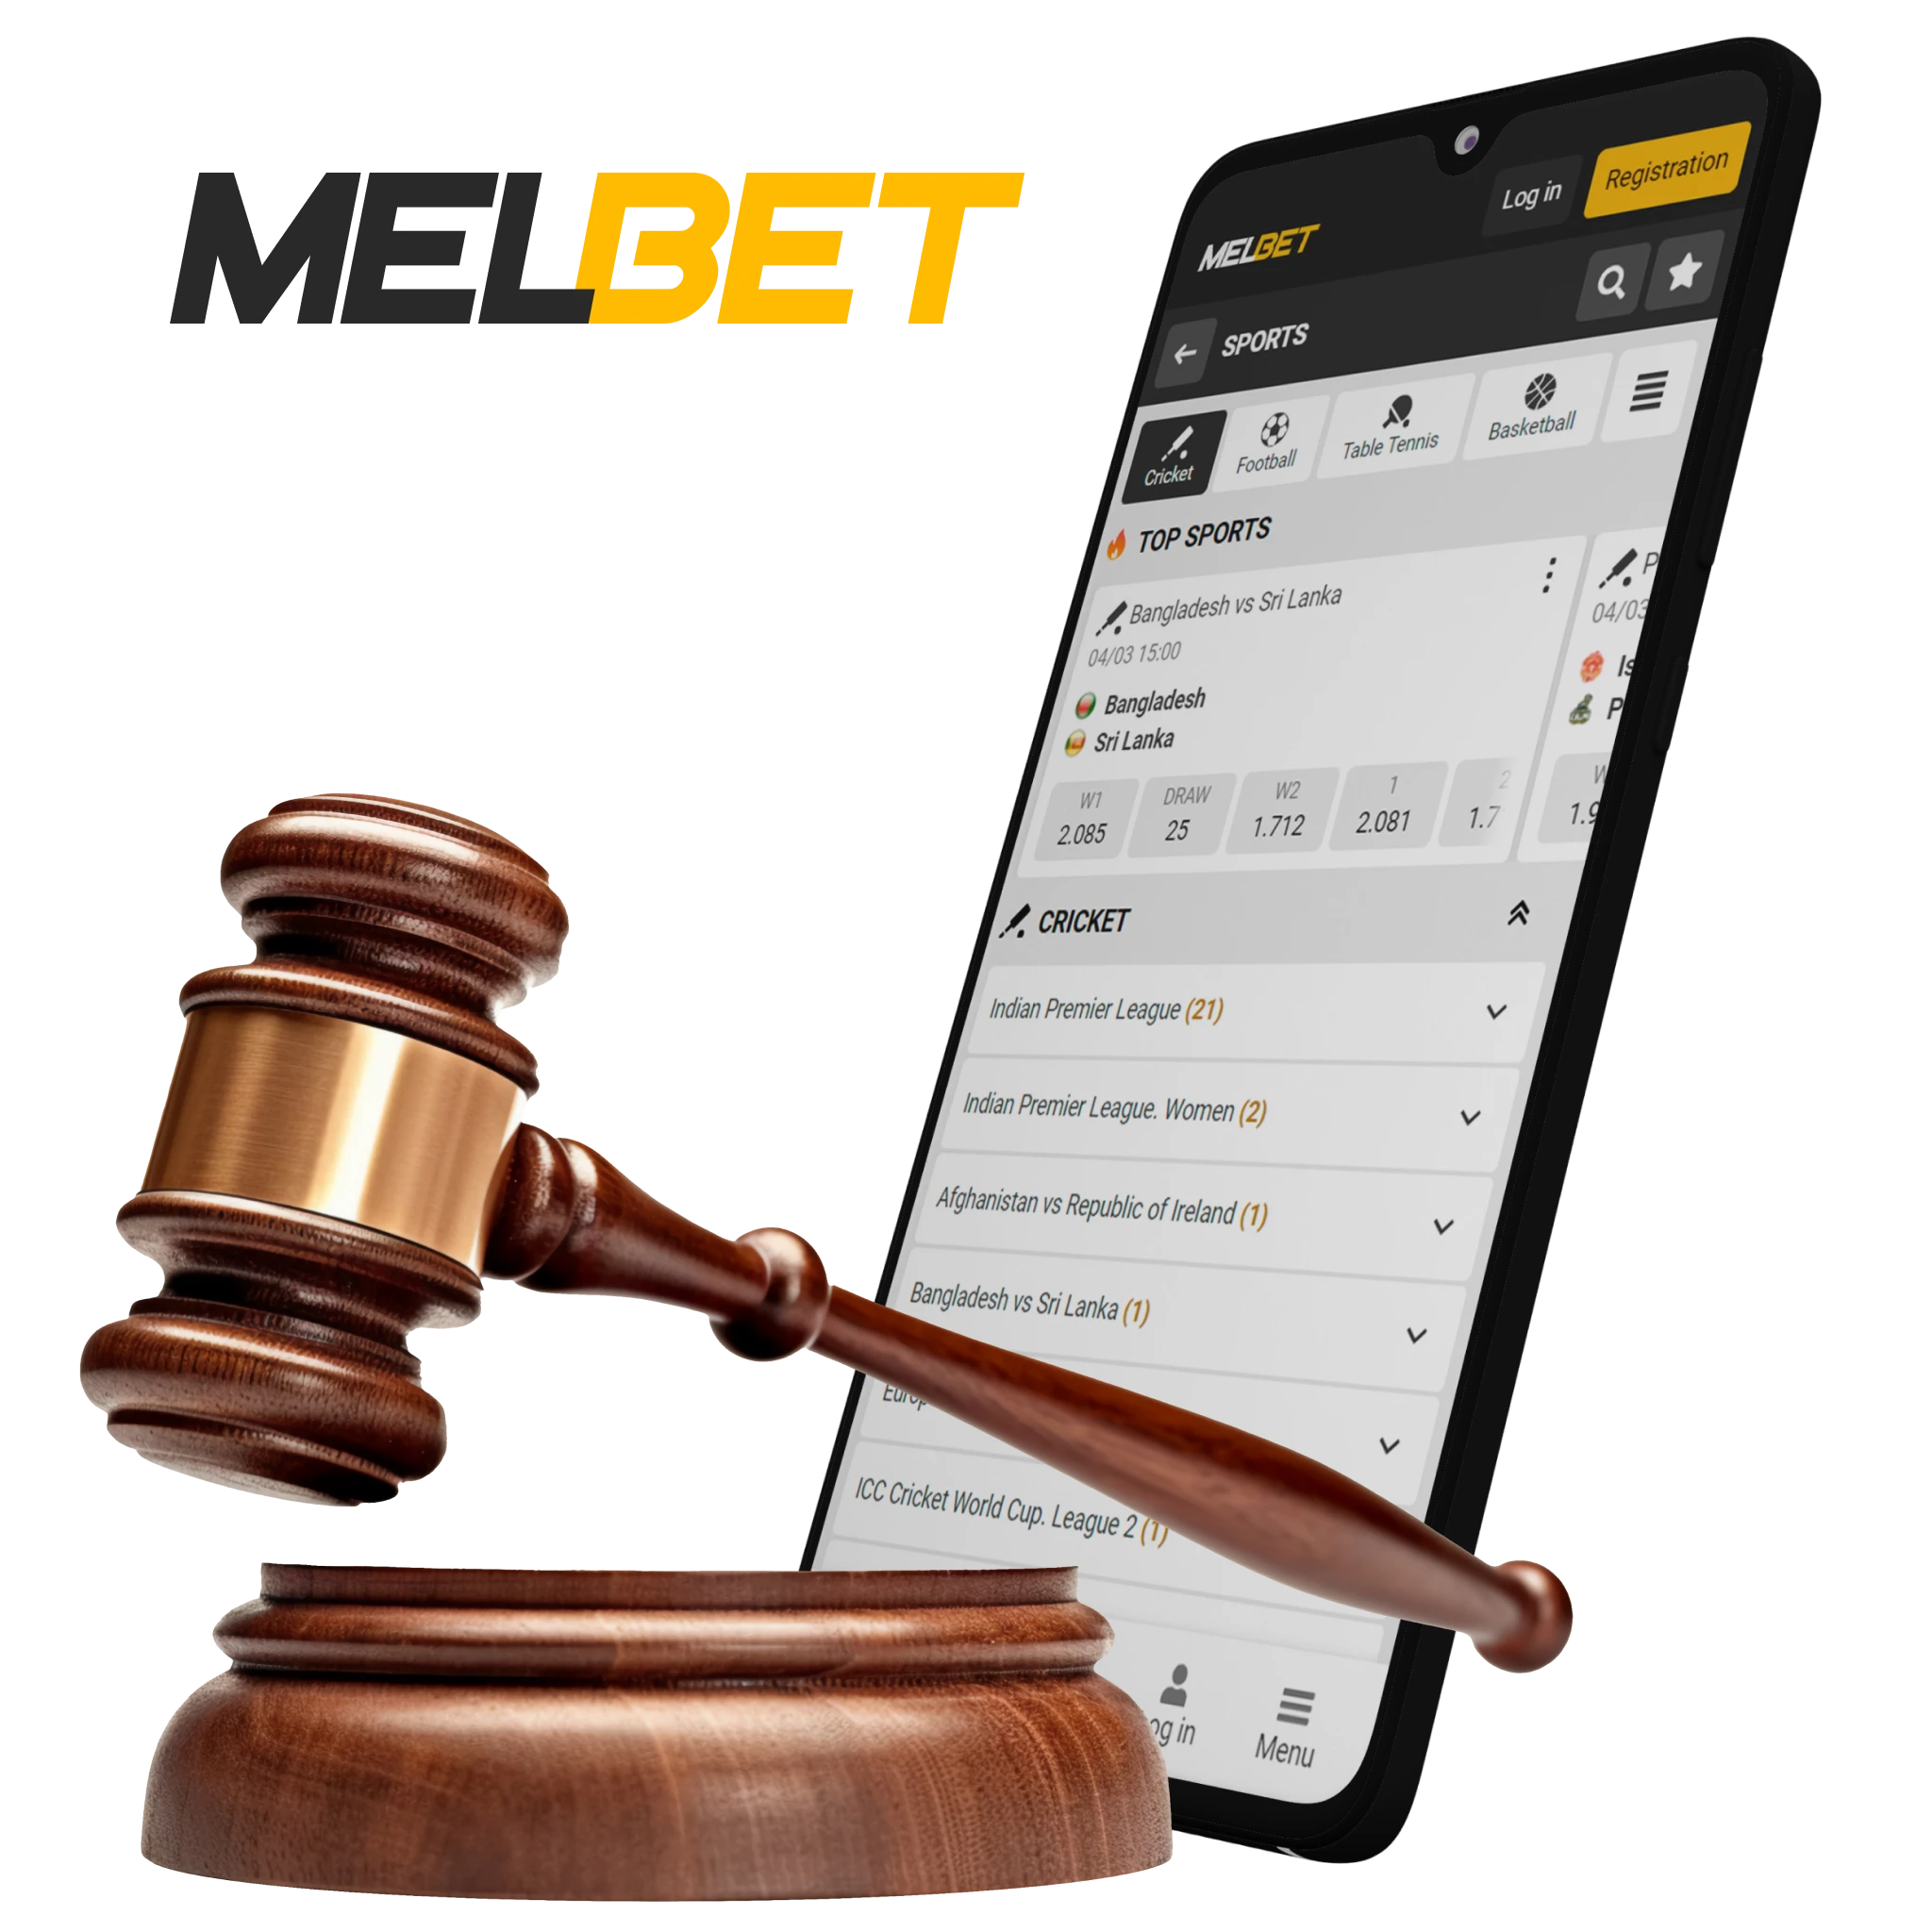 Cricket lovers prefer Melbet app to place bets on cricket.